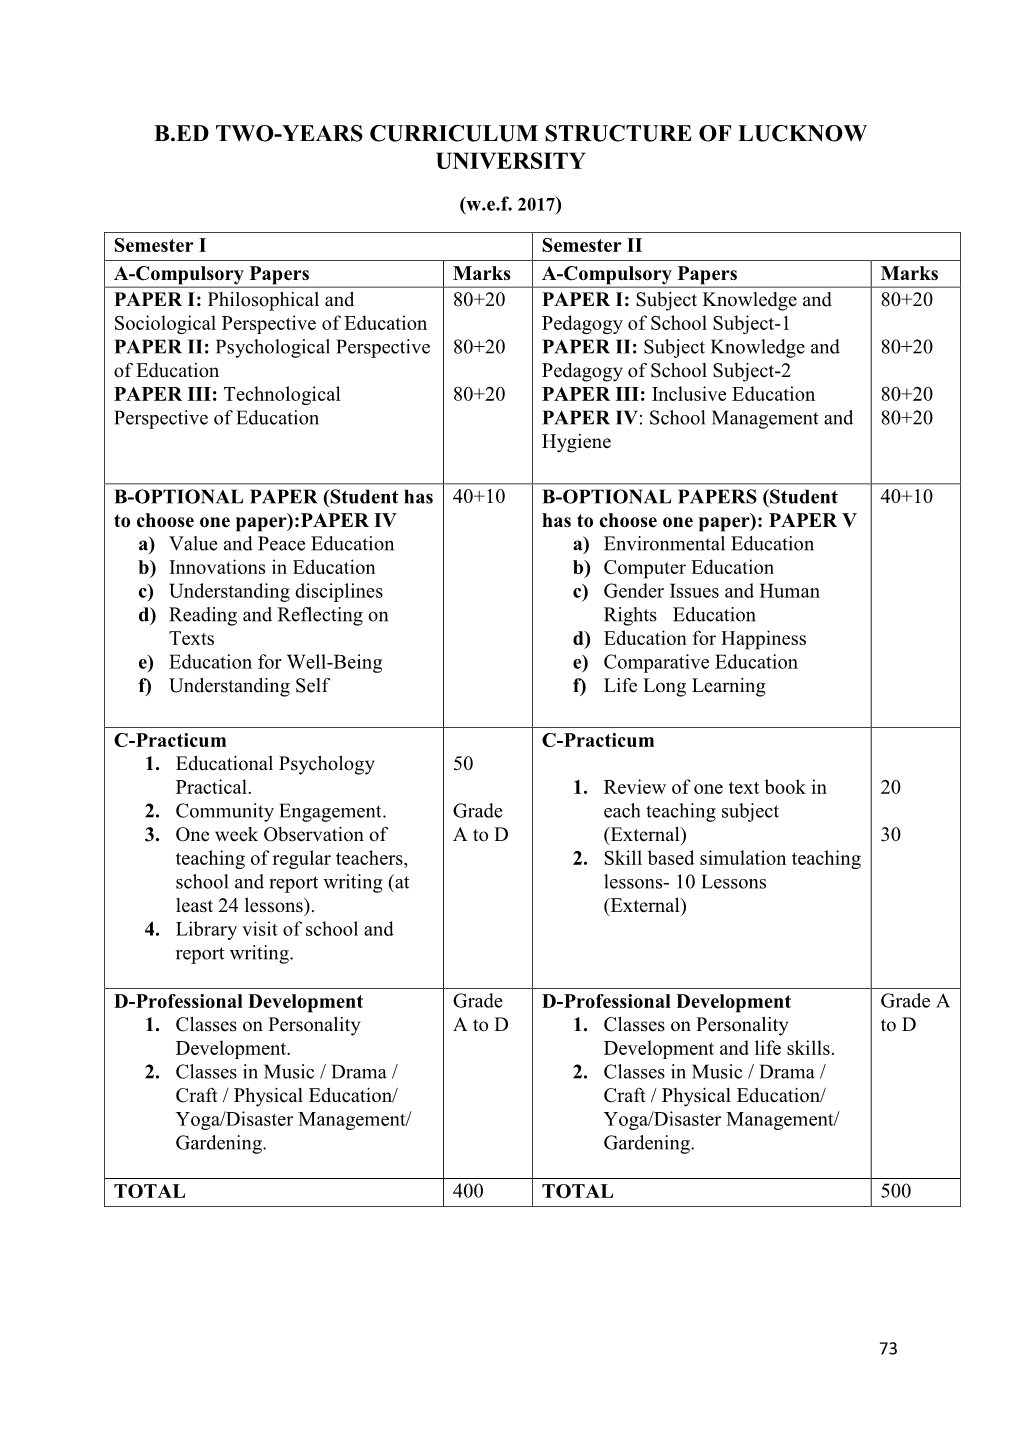 B.Ed Two-Years Curriculum Structure of Lucknow University